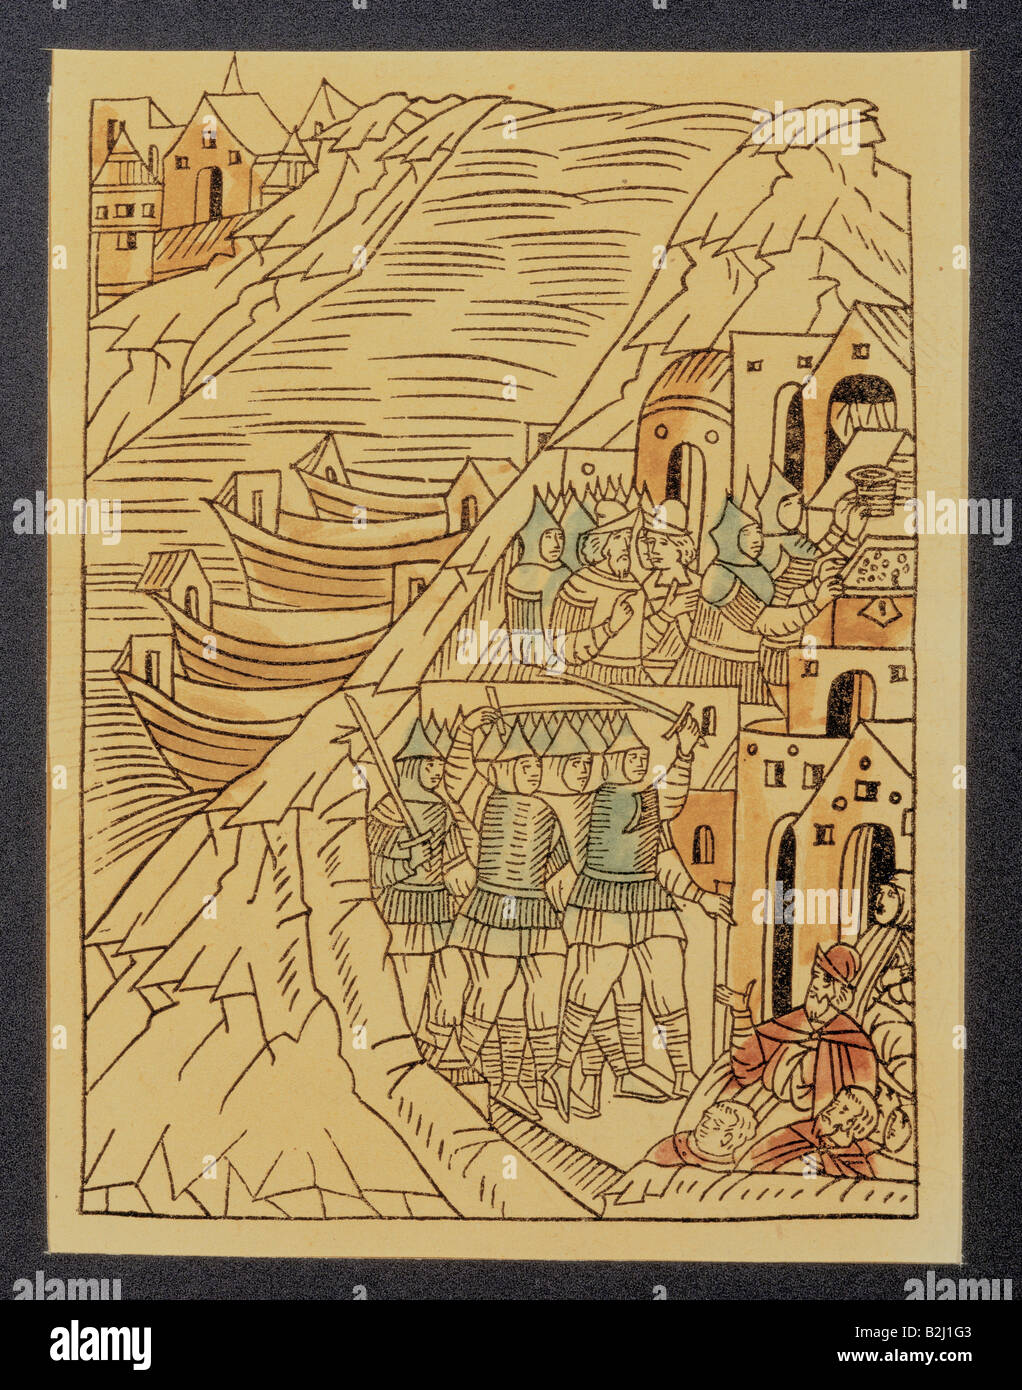 Middle Ages, Vikings, pillage of Kostroma, woodcut, coloured, 16th century, private collection, historic, historical, geography, Russia, boats, city view, Varangians, Varyags, warriors, soldiers, river, graphic, graphics, print, prints, people, medieval, Stock Photo